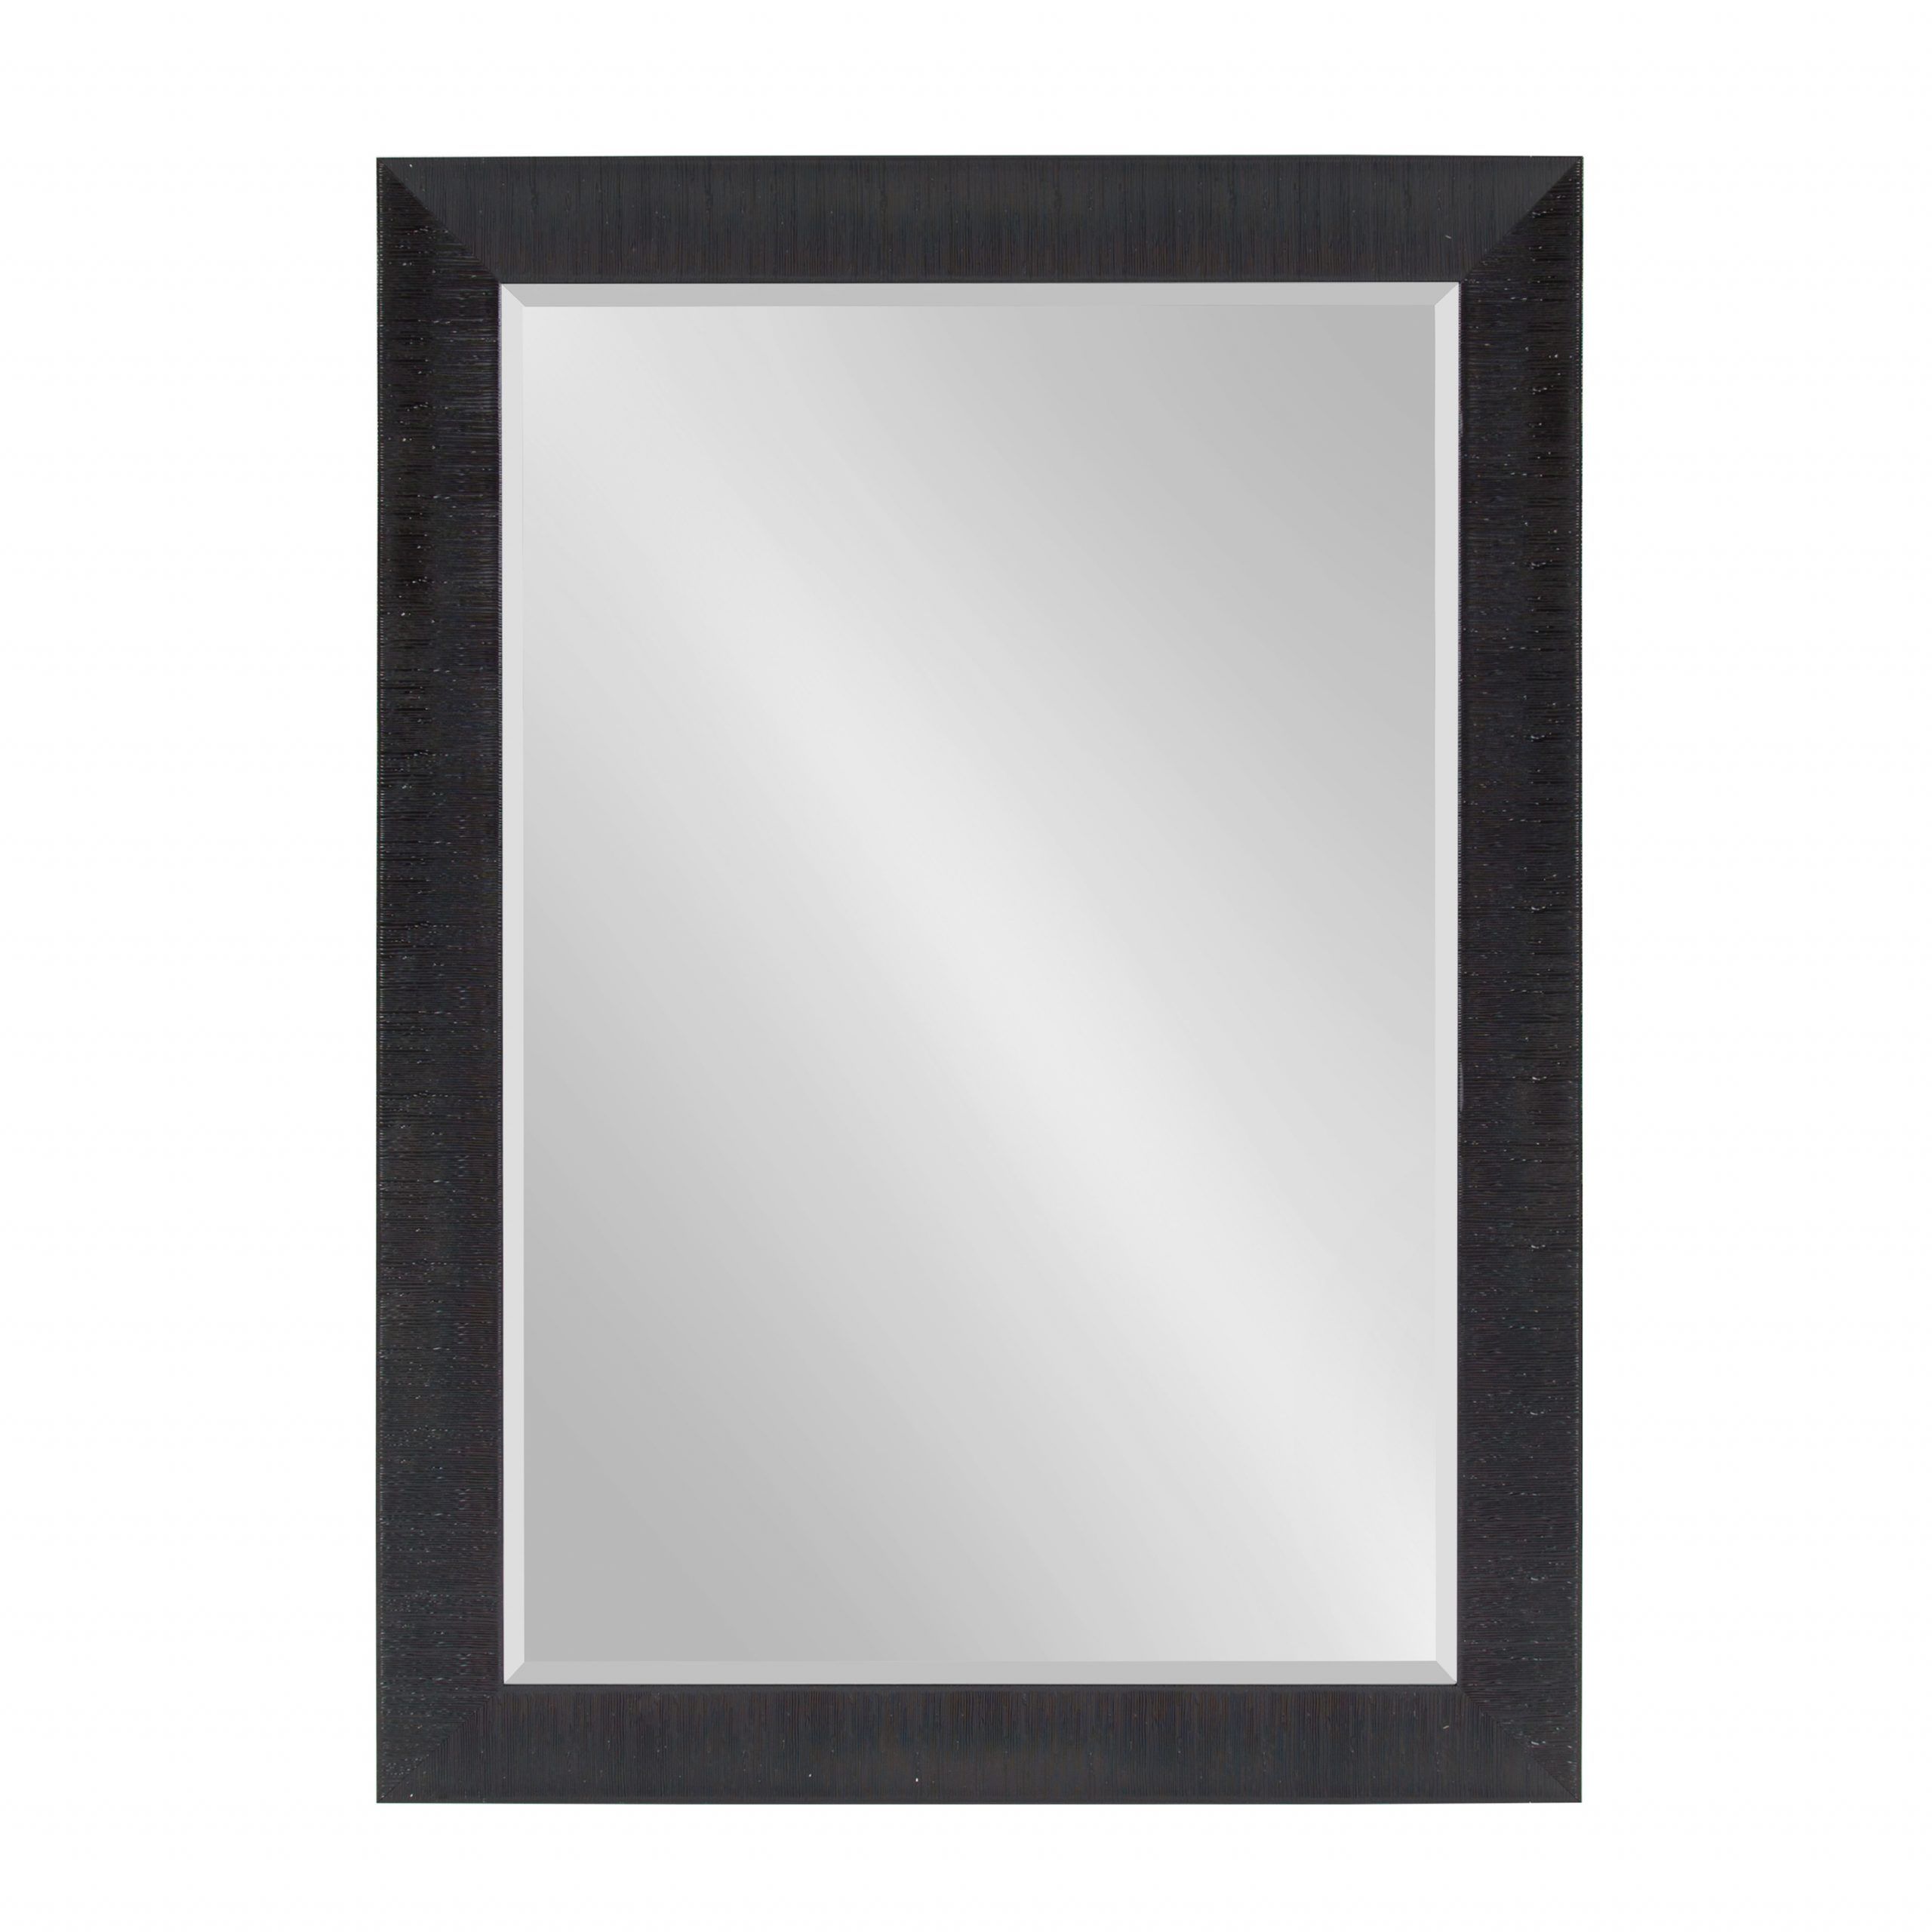 Fashionable Square Oversized Wall Mirrors In Kate And Laurel – Reyna Large Framed Rectangle Wall Mirror, 30 X  (View 11 of 15)